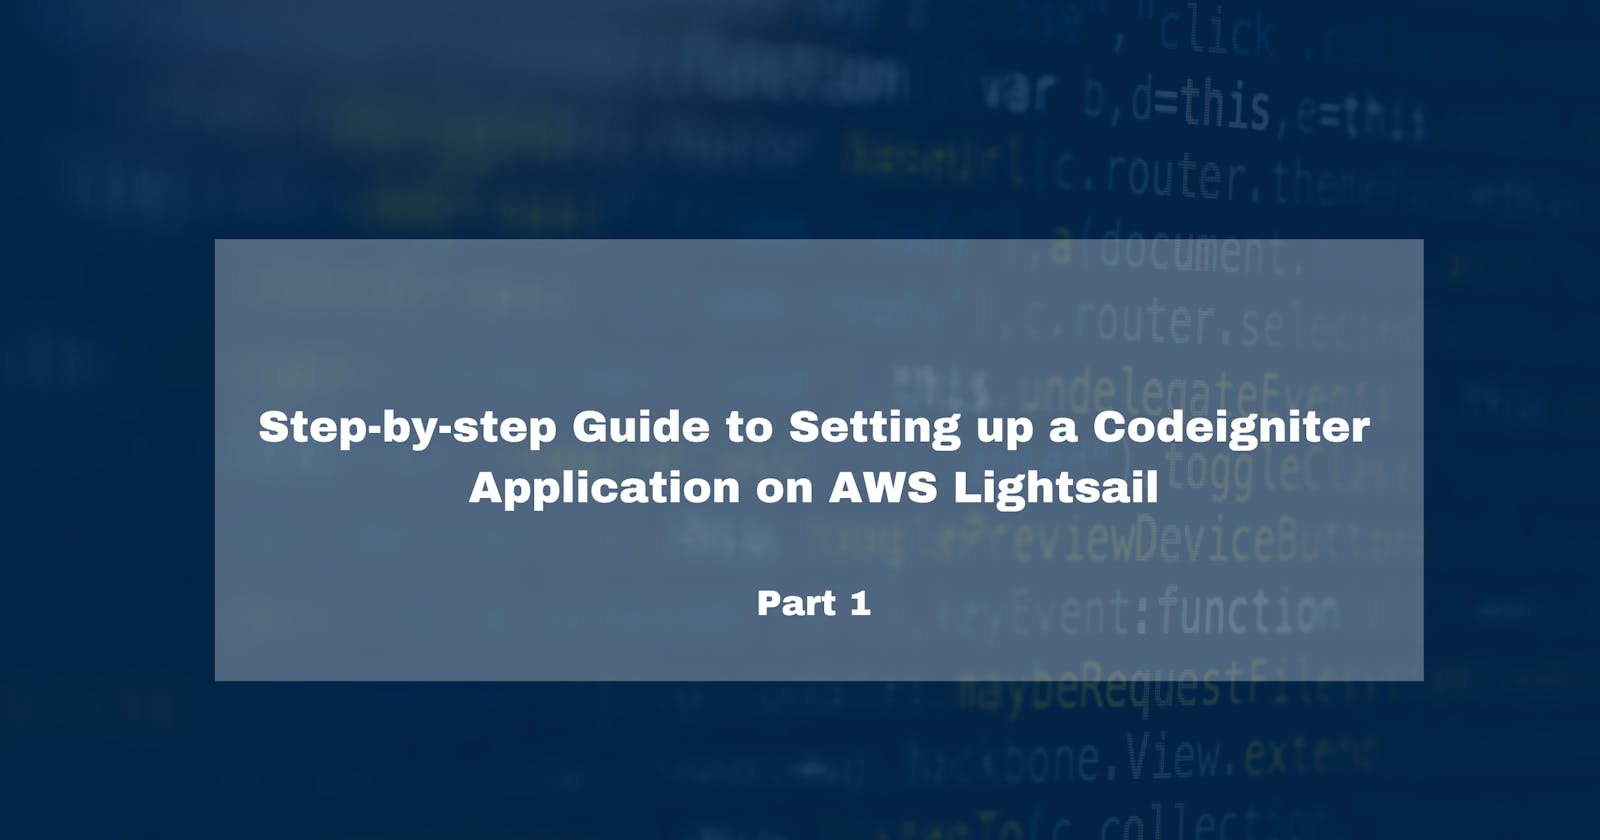 Step-by-step Guide to Setting up a Codeigniter Application on AWS Lightsail